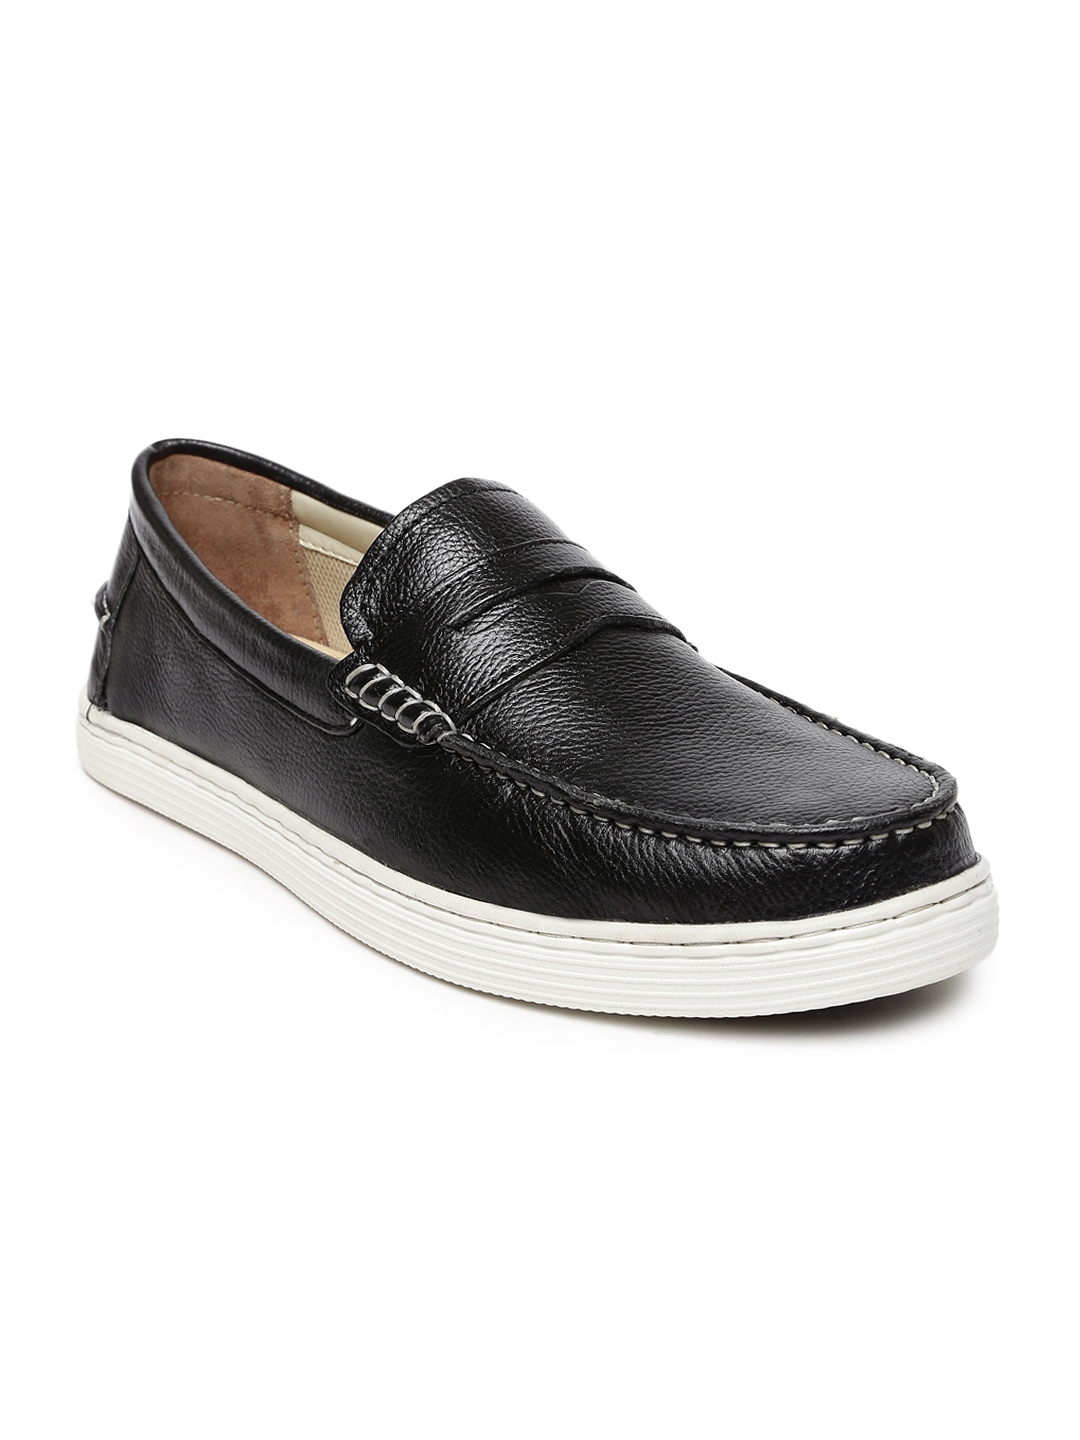 Buy Hush Puppies Men Black Leather Loafers - Casual Shoes for Men ...